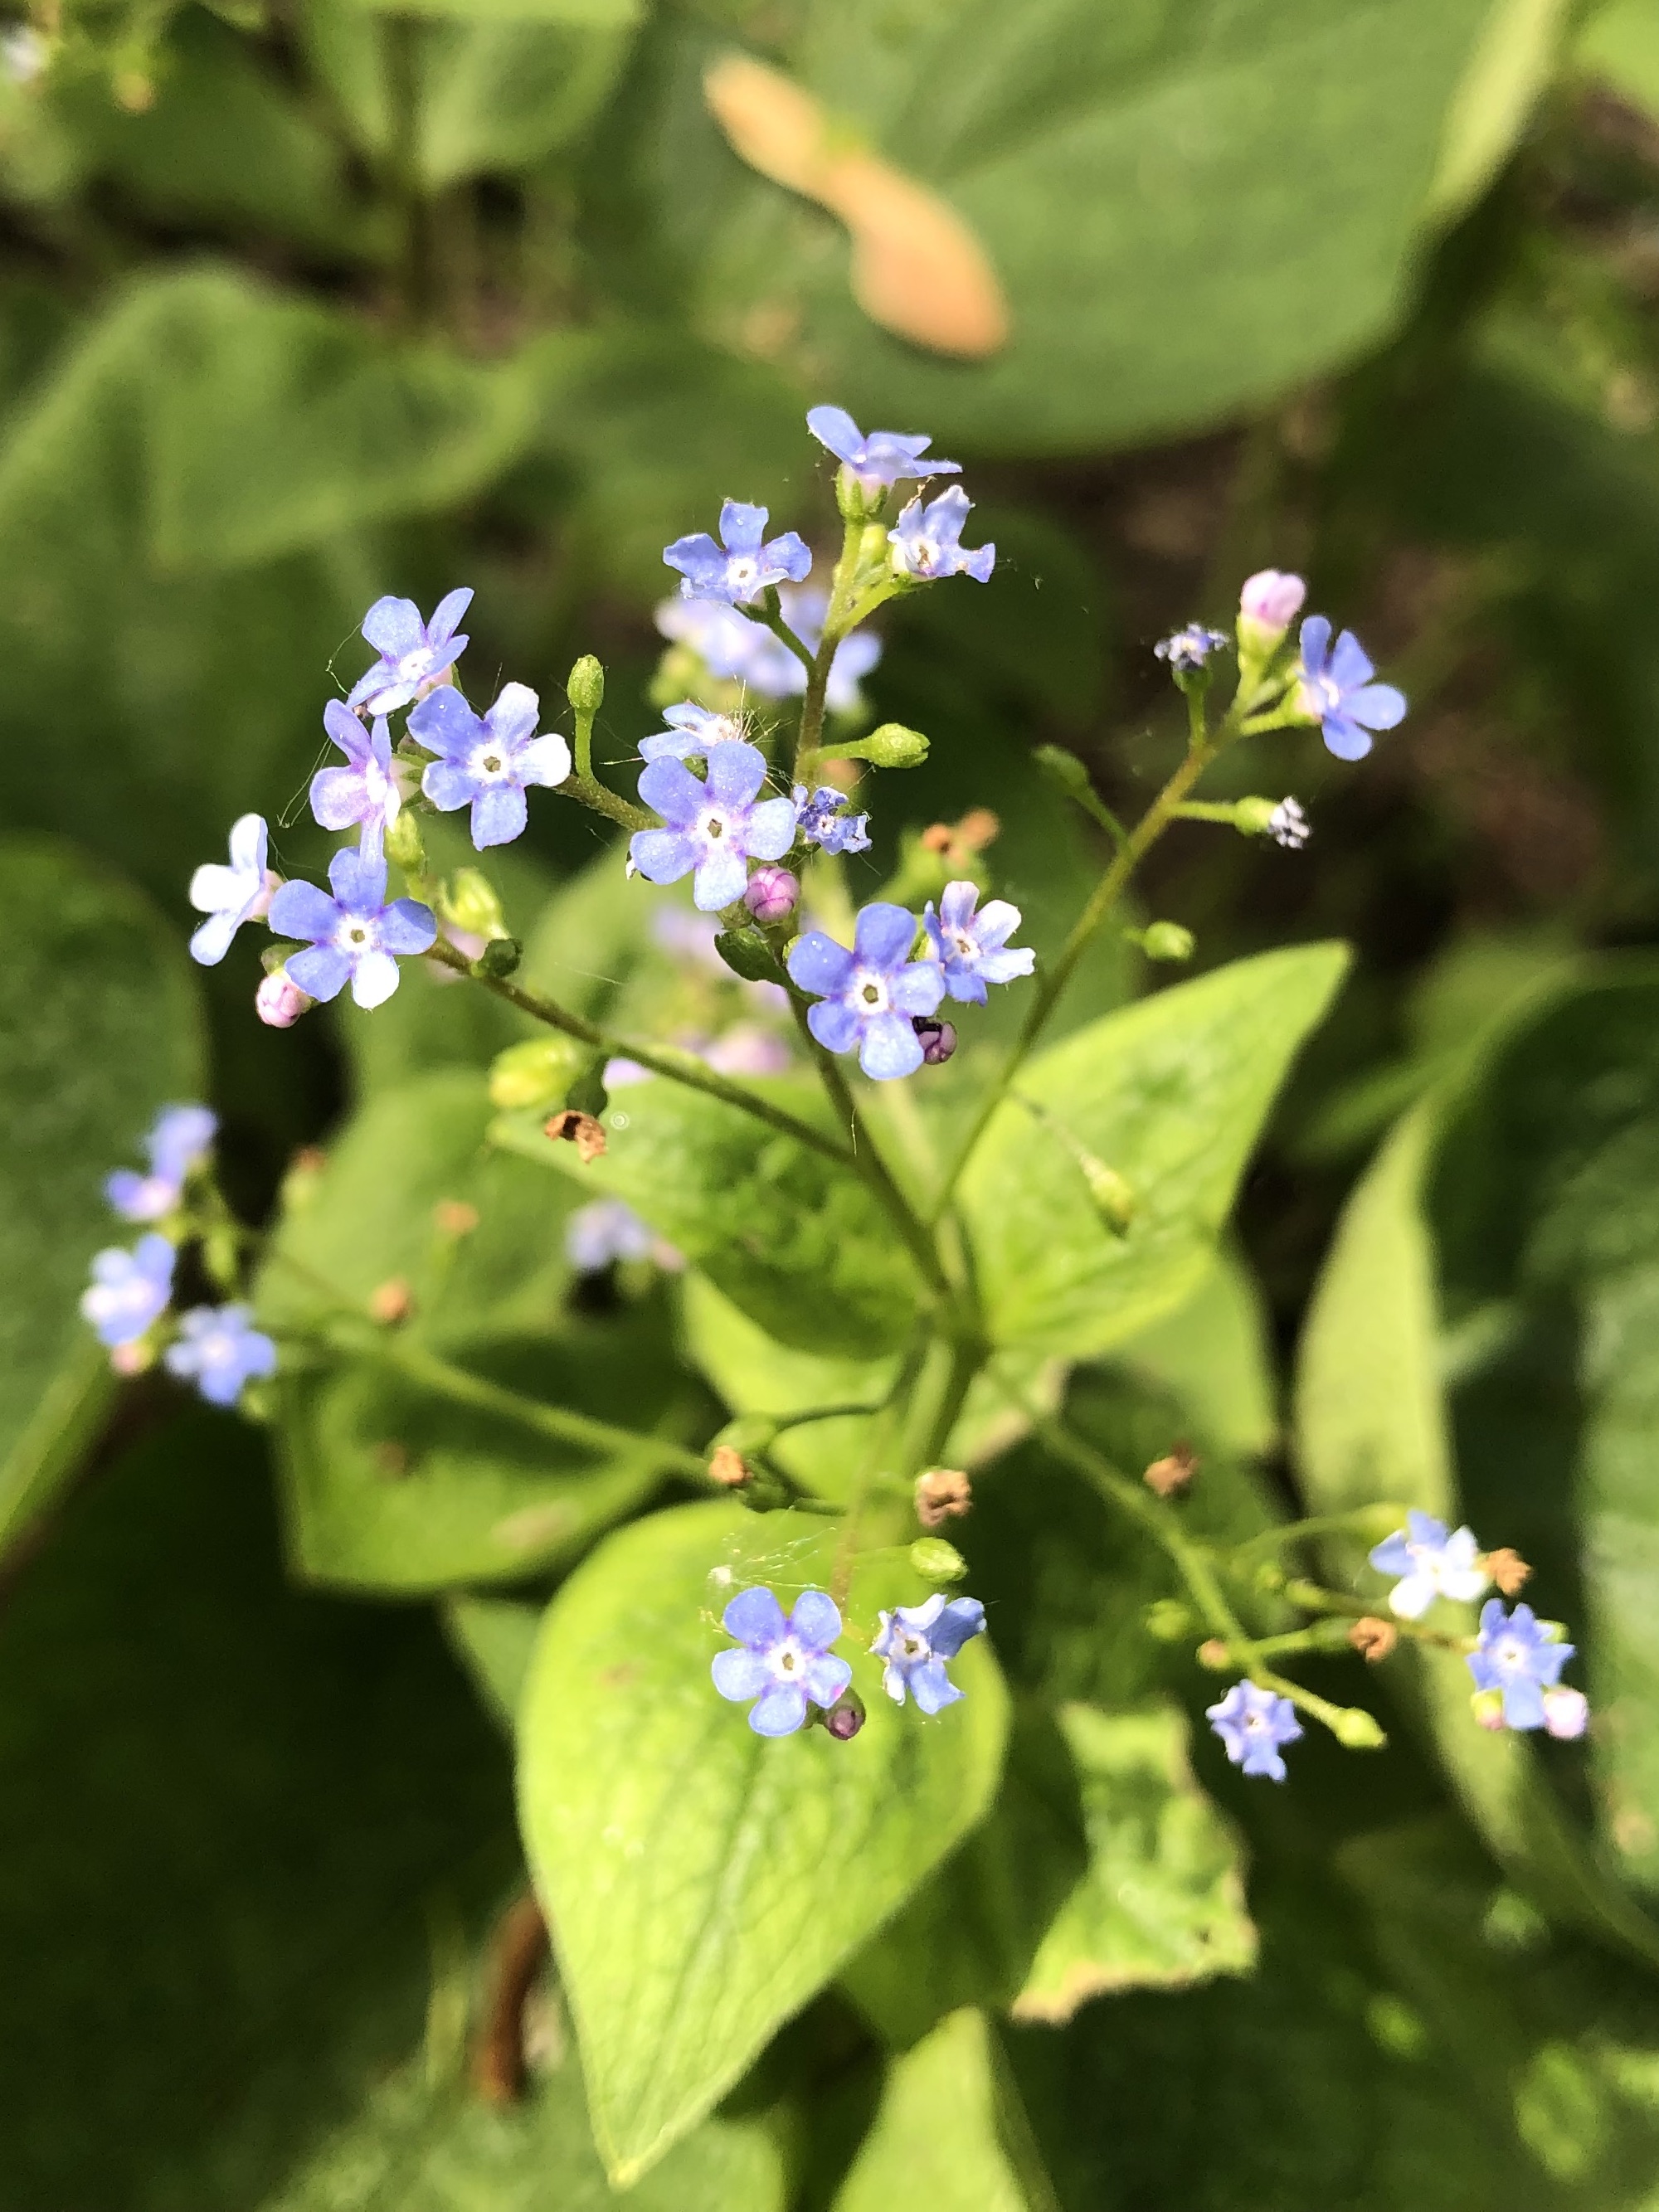 False Forget-Me-Not near Agawain Madison, Wisconsin on May 23, 2022.